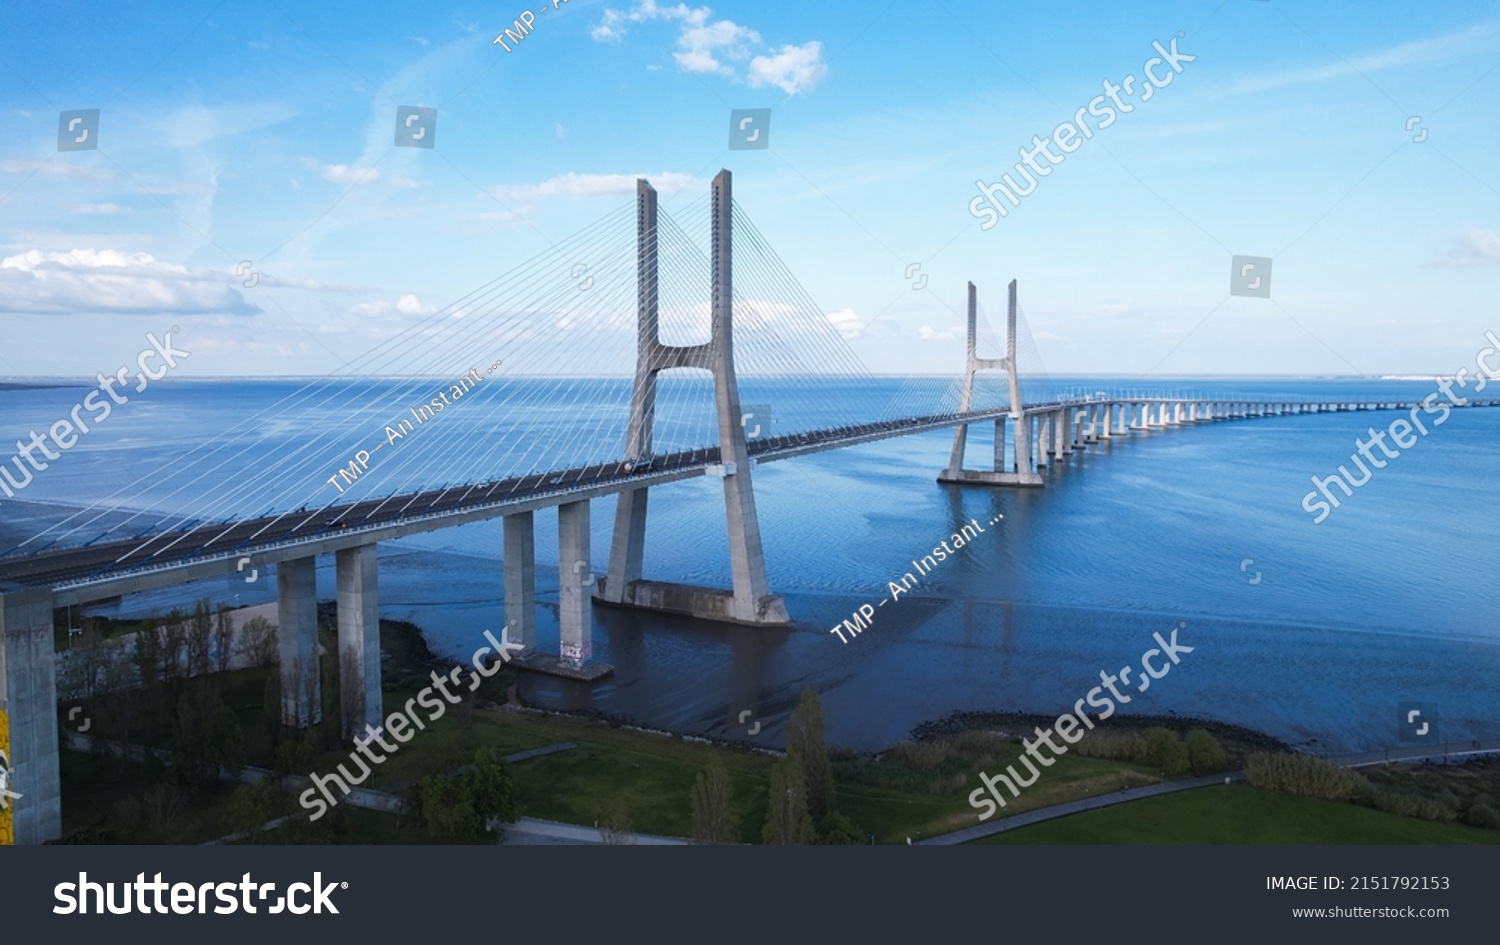 Aerial view of the Vasco da Gama Bridge is a cable-stayed bridge located in the city of Lisbon in Portugal and crosses the Tagus River. It is the second-longest bridge in Europe. #2151792153